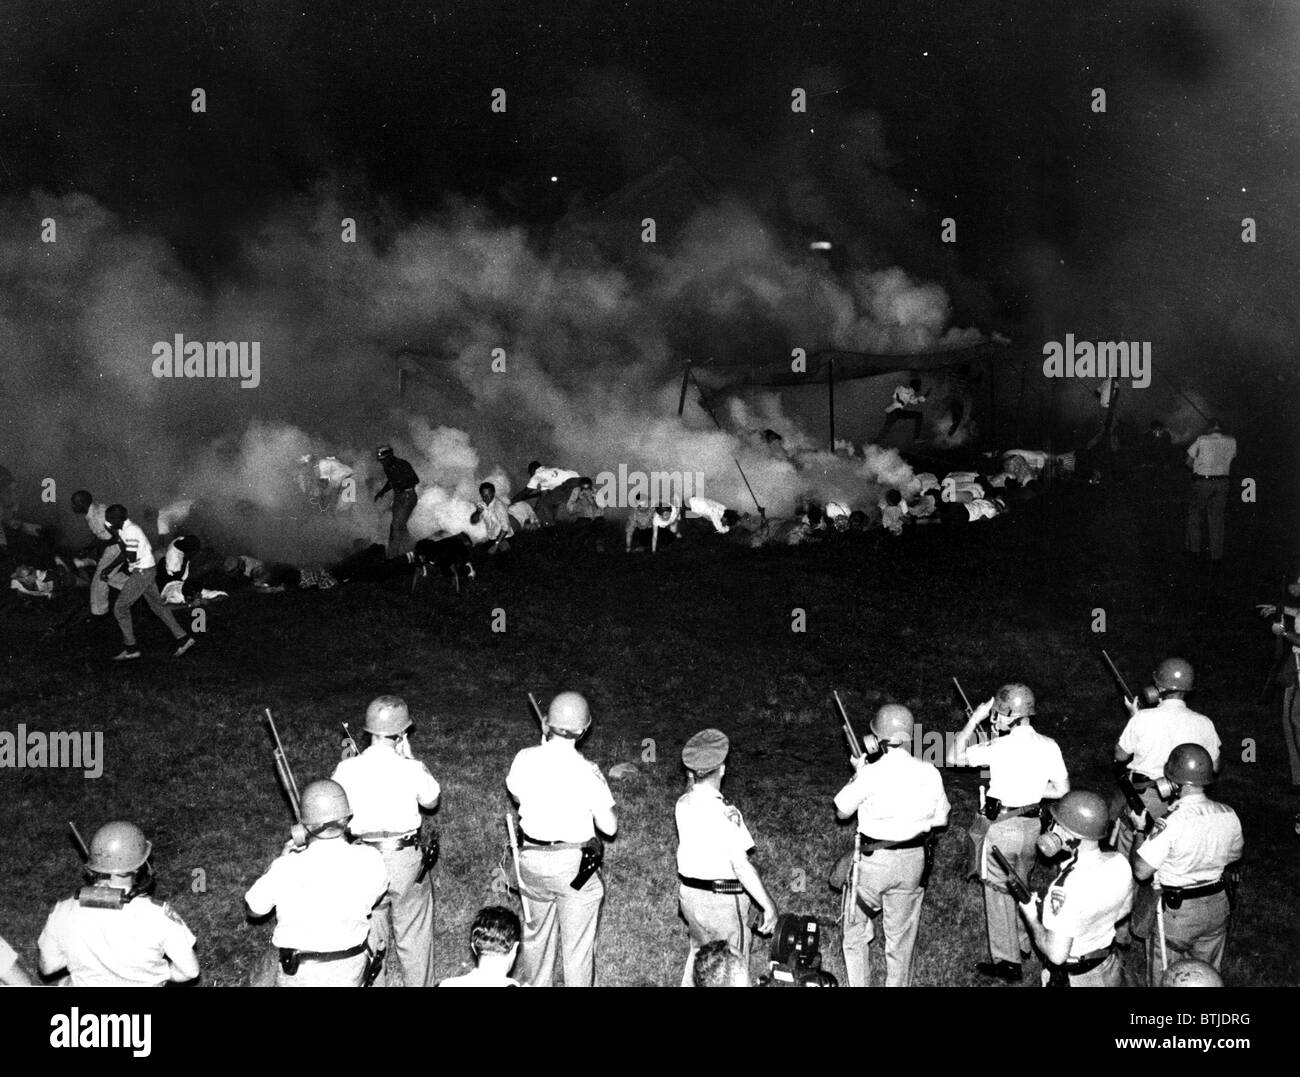 State troopers scatter demonstrators with tear gas, Canton, MS, 12/12/66. Photo by Joe Holloway. Stock Photo